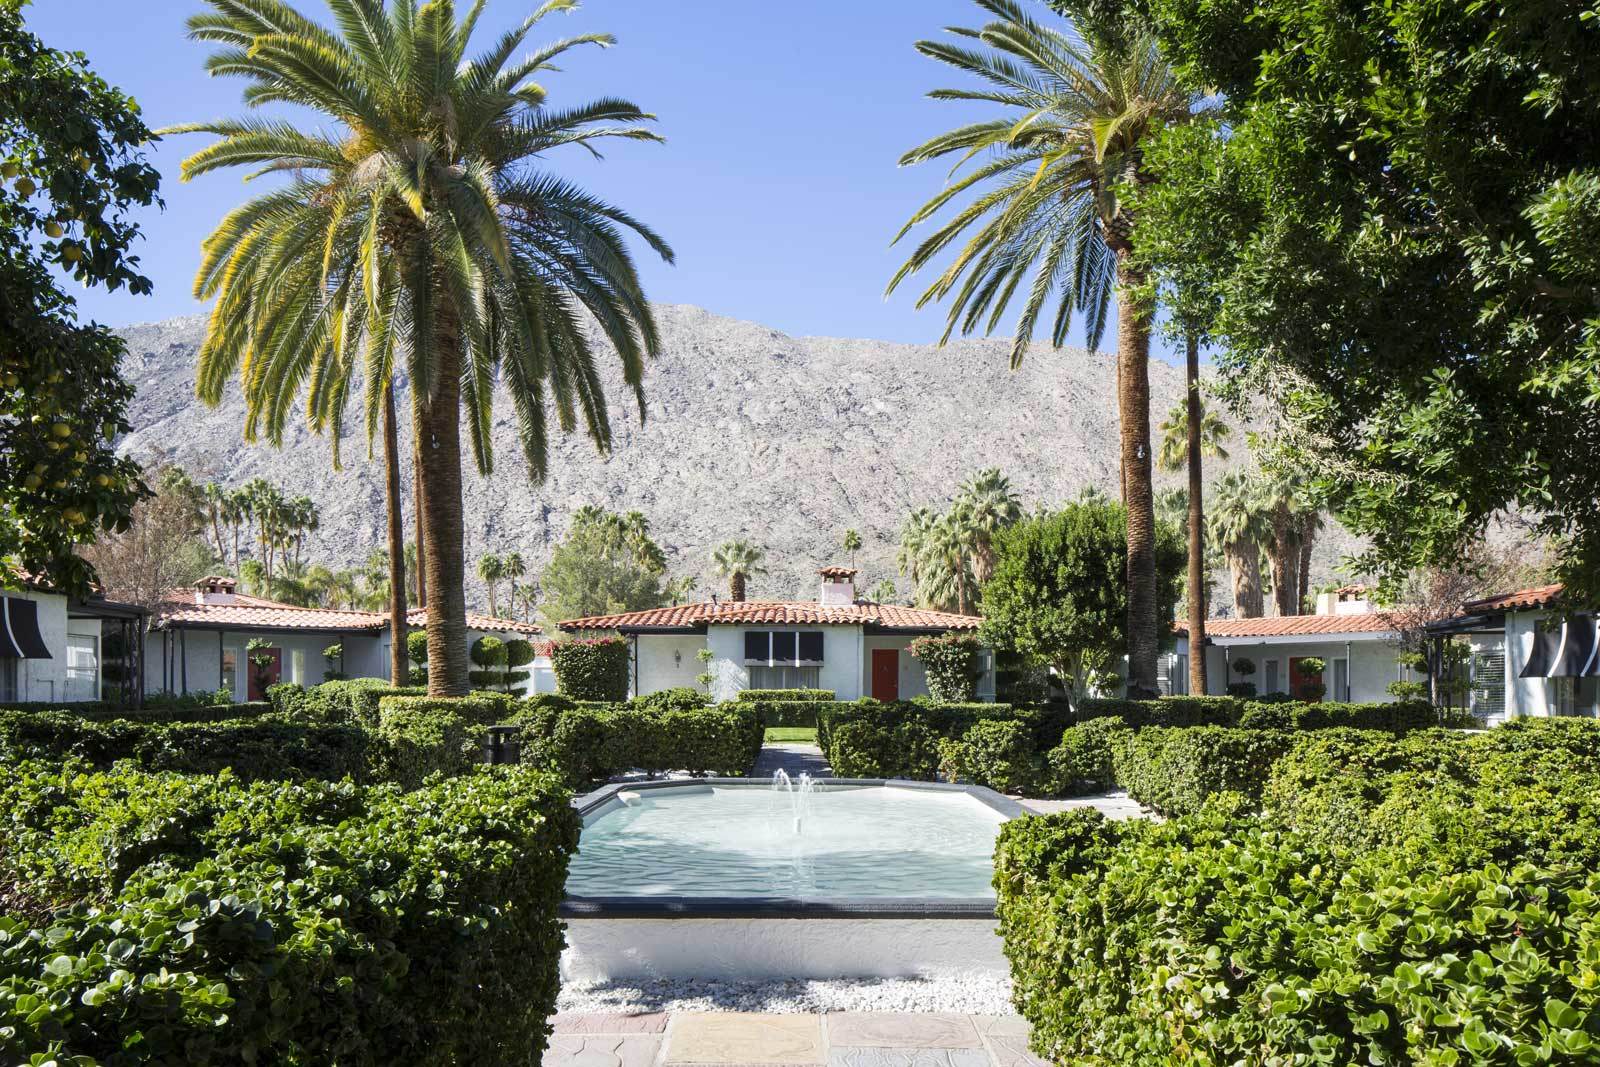 new downtown palm springs hotels - Hoch Biog Pictures Library